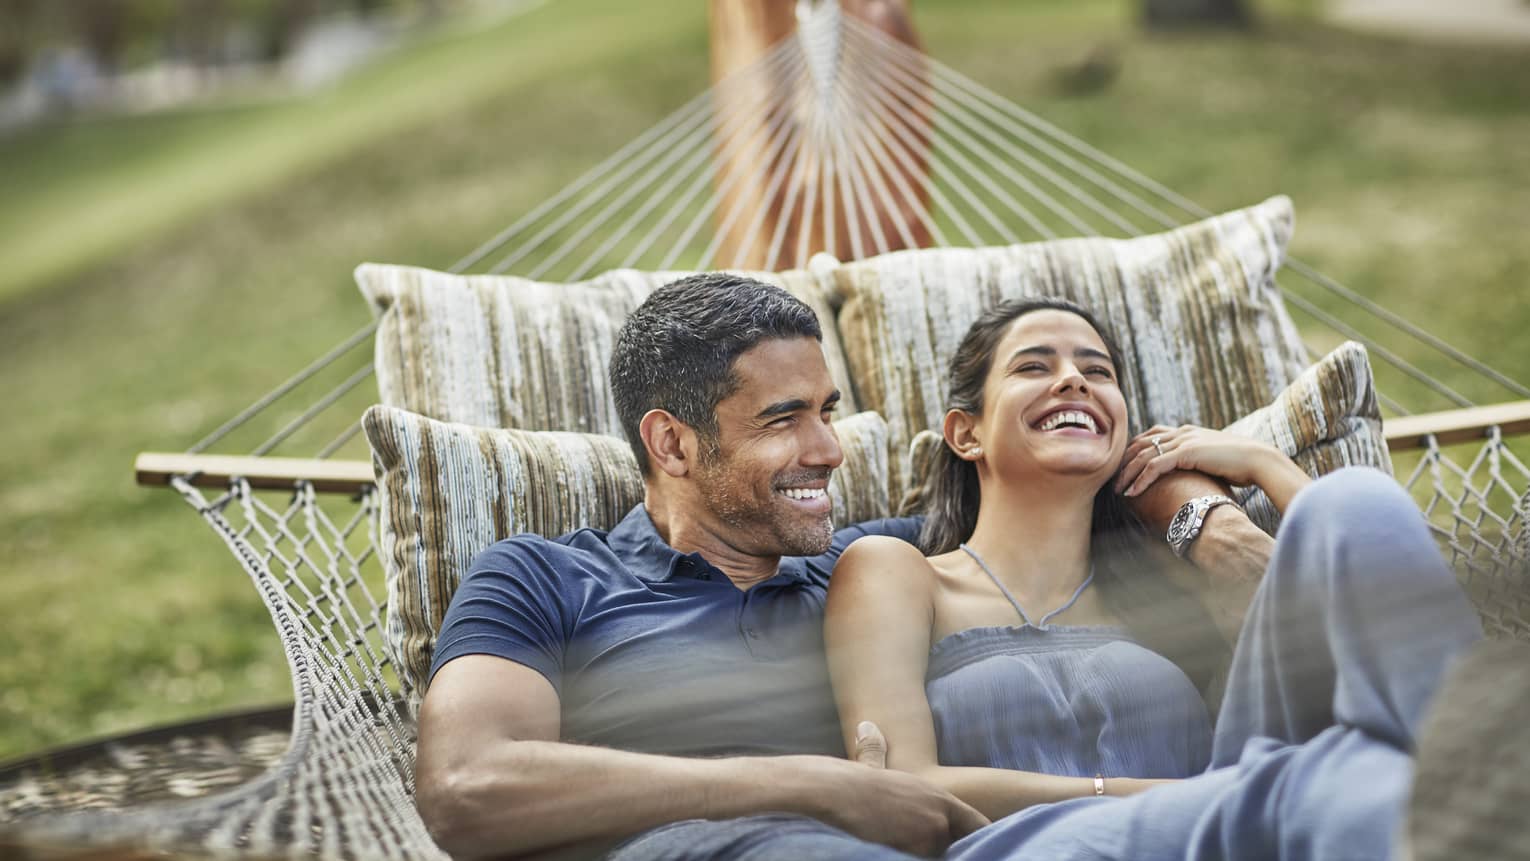 Smiling couple relaxes in hammock on lawn